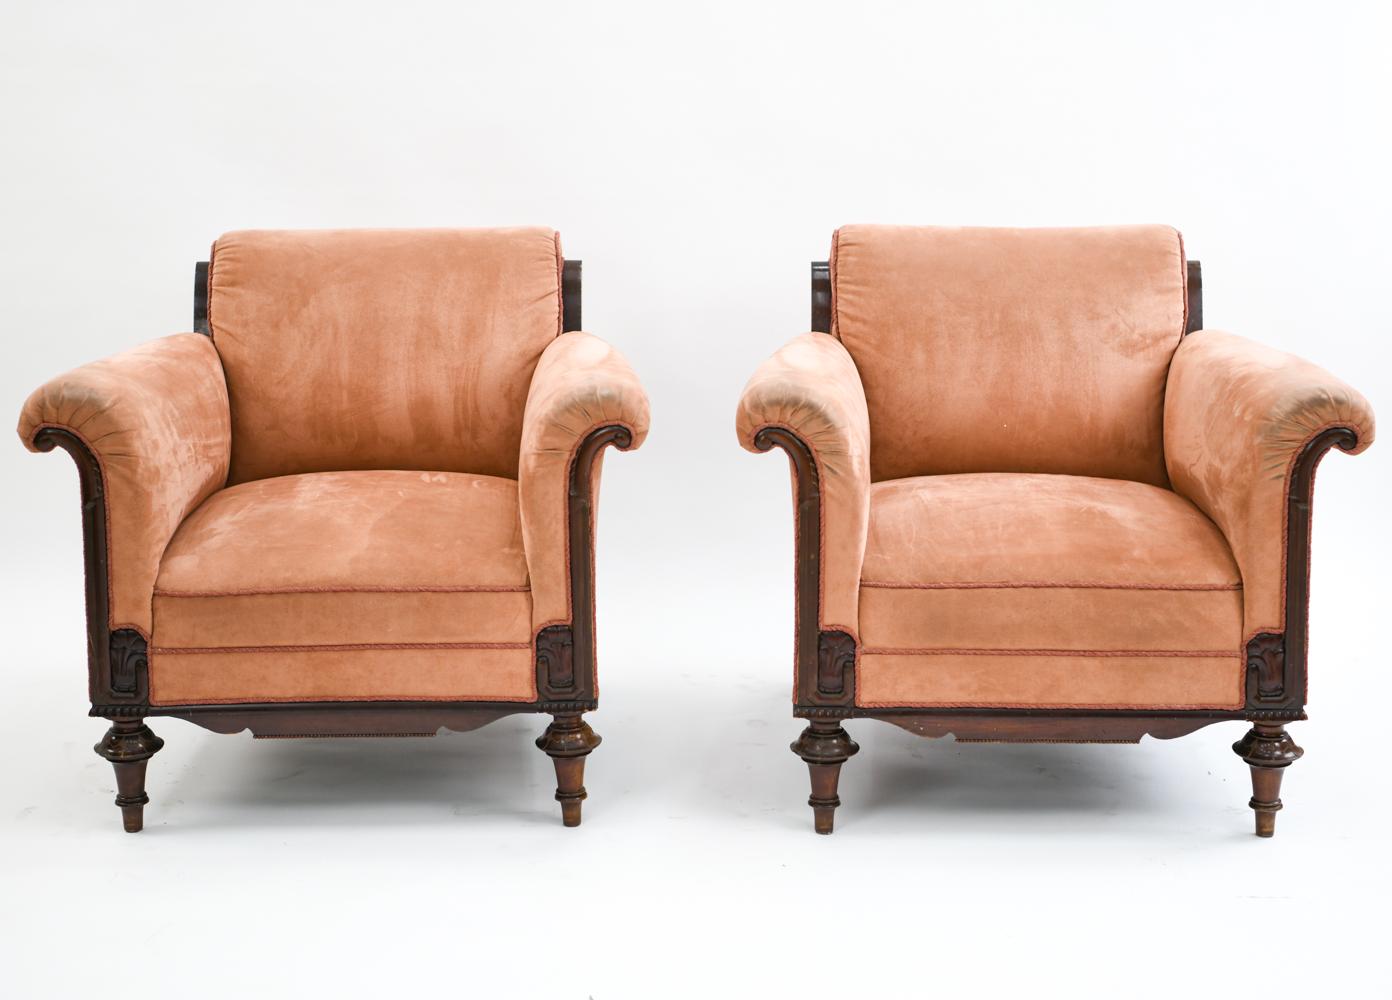 This Classic pair of lounge chairs were manufactured by C.B. Hansen, circa 1930s. The design is attributed to Johan Rohde and features curved arms with carved wooden frames.